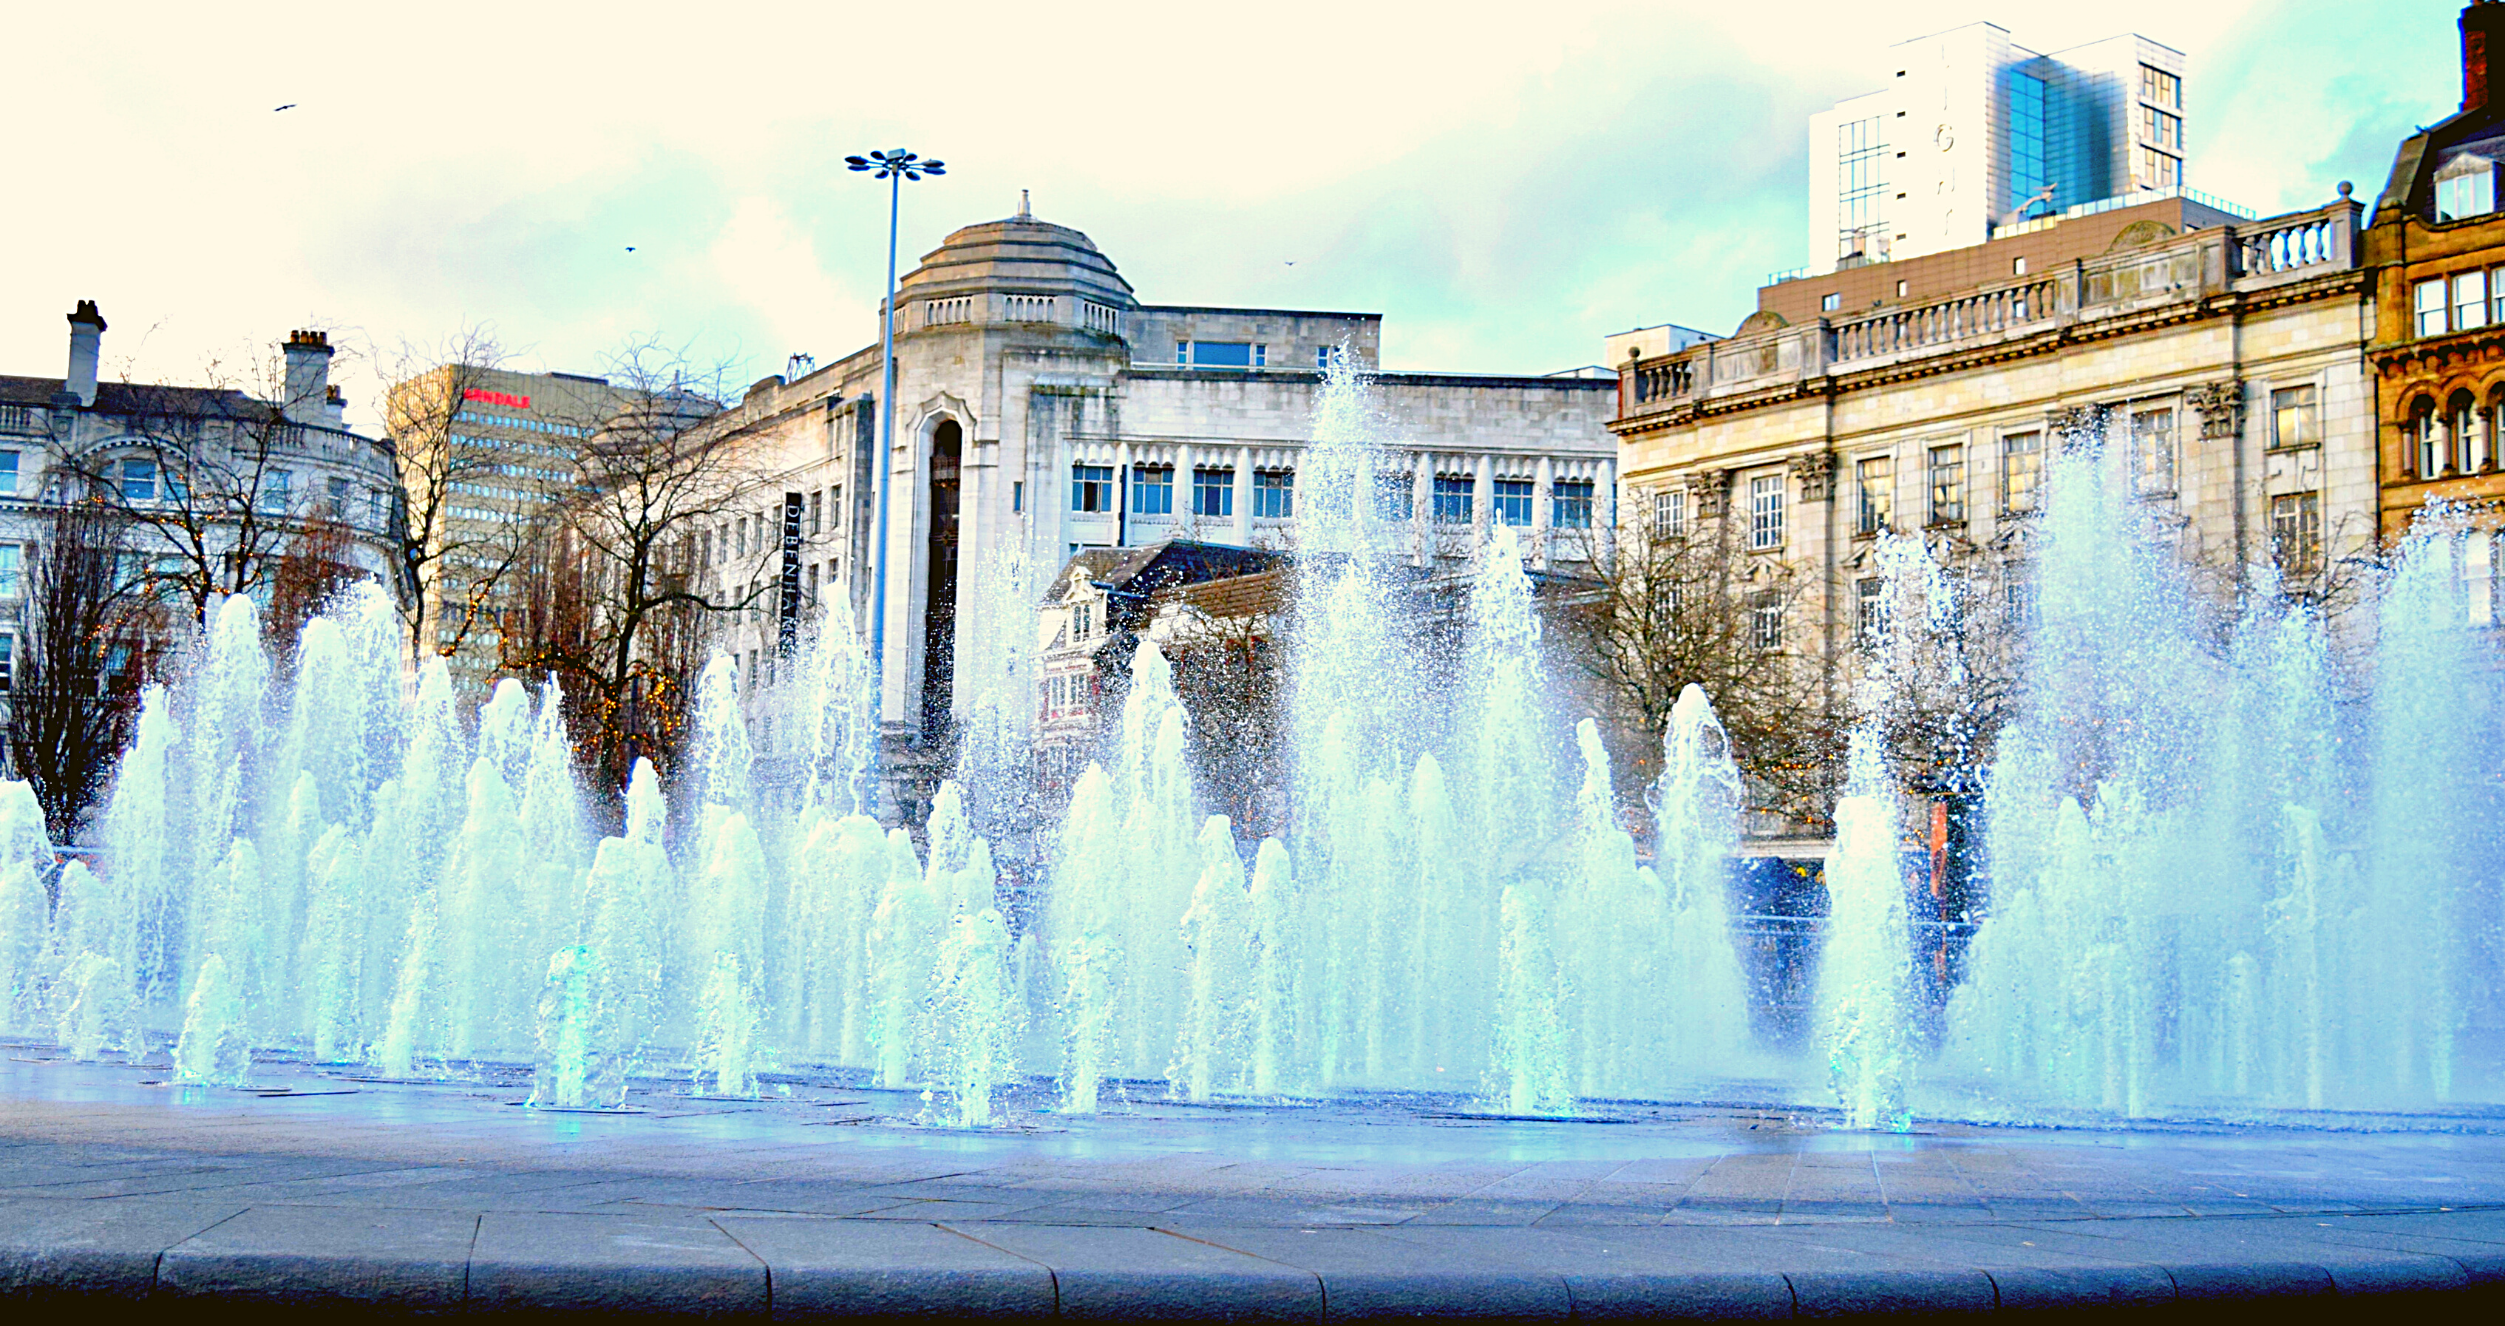 Fountains in Manchester